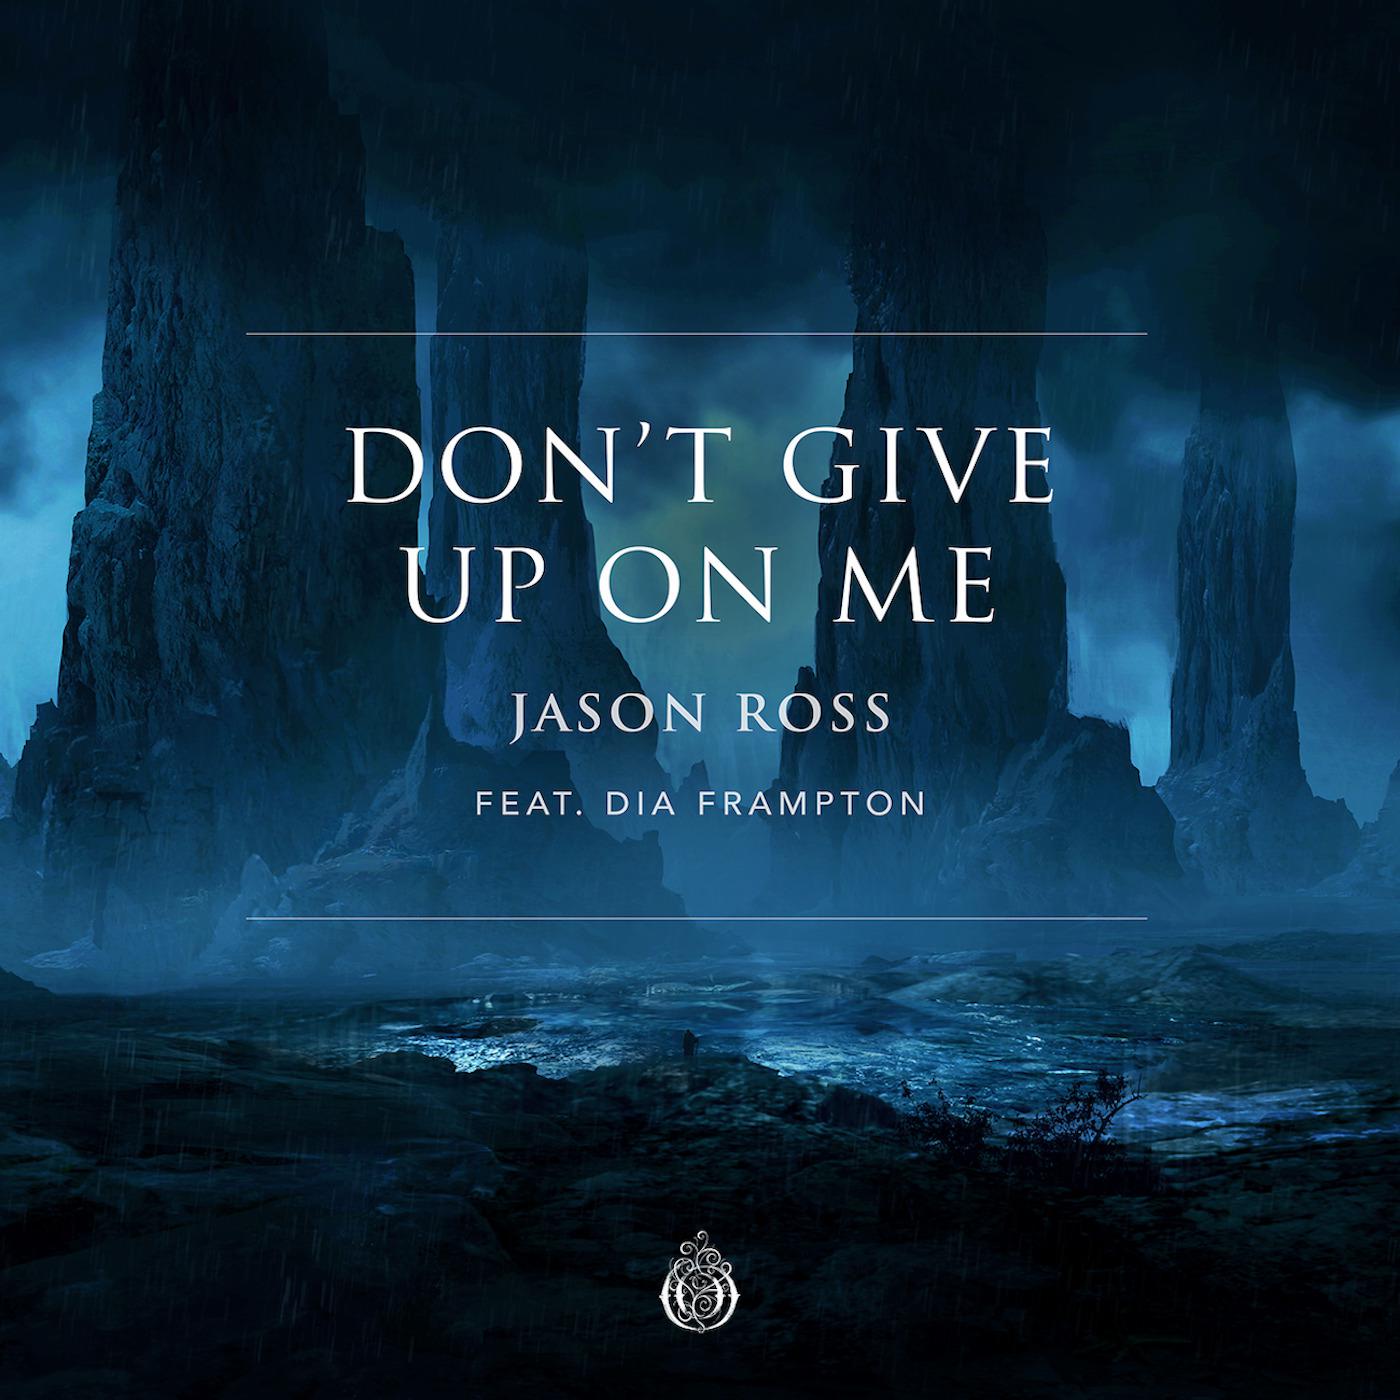 Don't Give Up On Me歌词 歌手Jason Ross / Dia Frampton-专辑Don't Give Up On Me-单曲《Don't Give Up On Me》LRC歌词下载